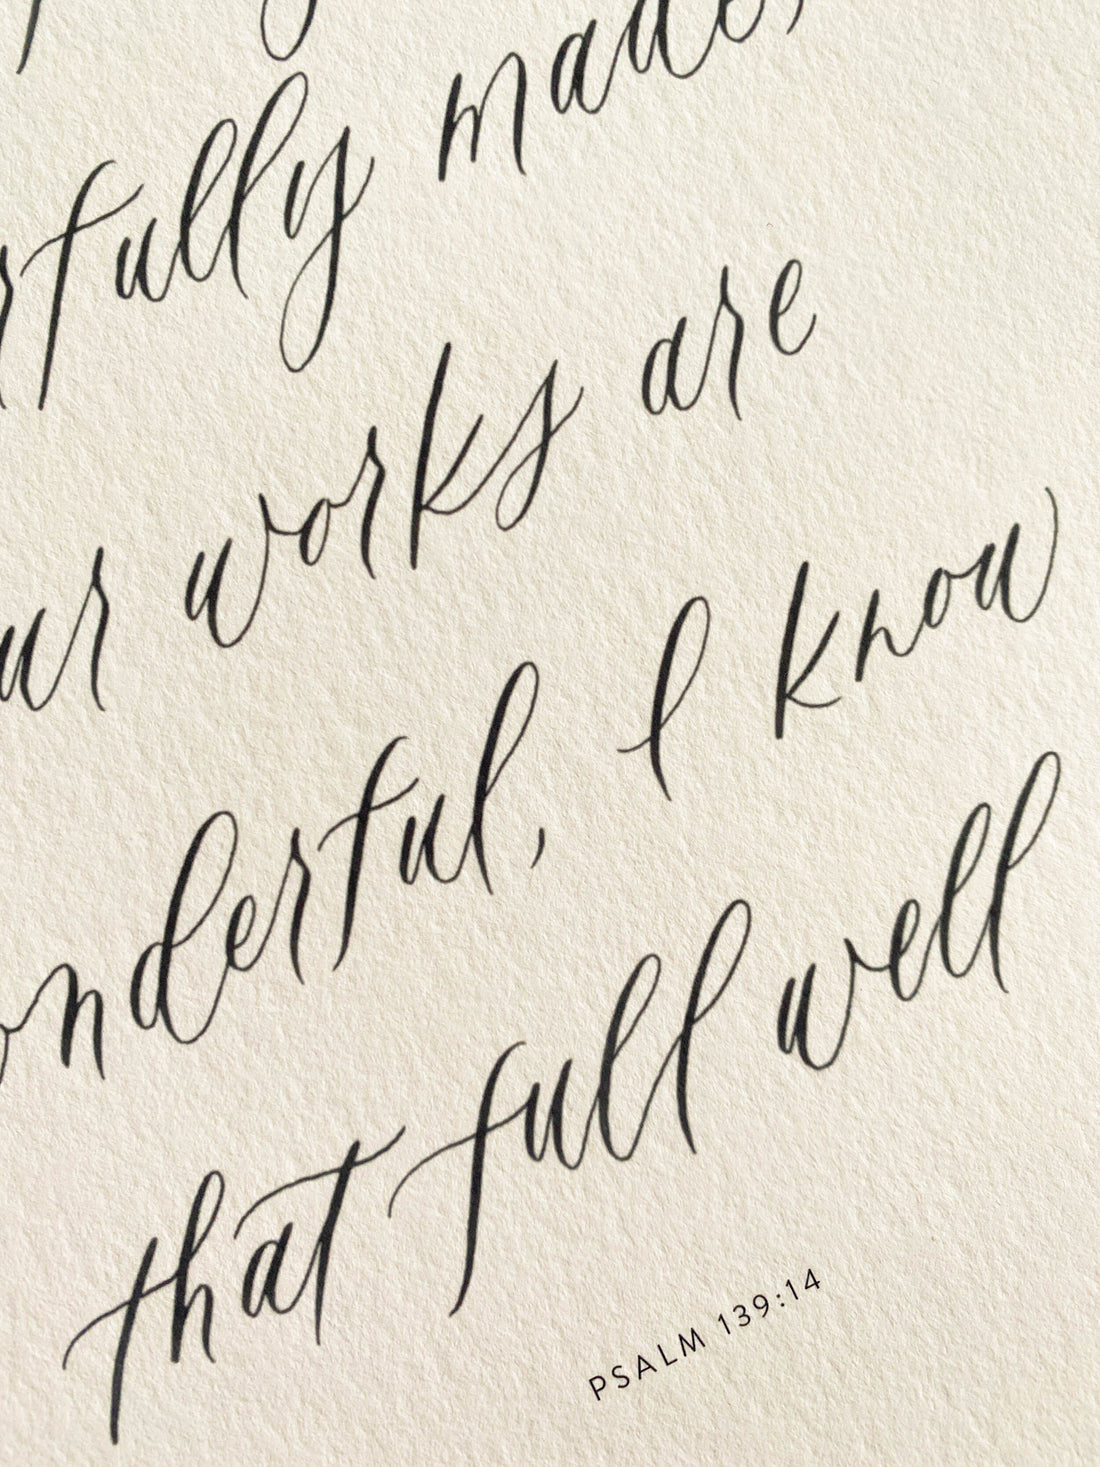 Fearfully and Wonderfully Print